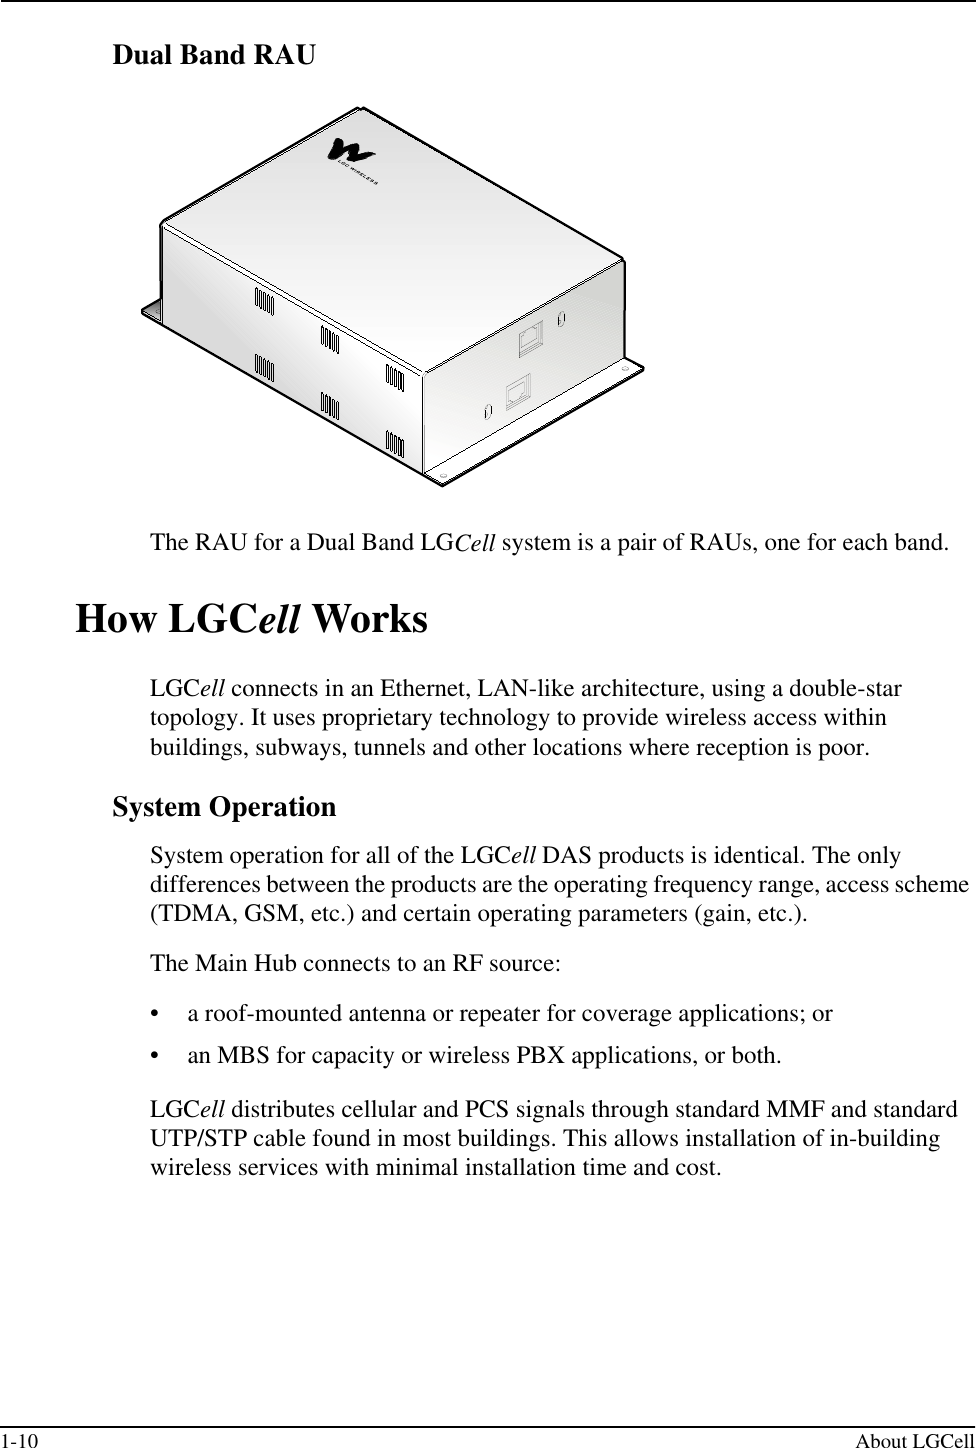 1-10 About LGCellDual Band RAUThe RAU for a Dual Band LGCell system is a pair of RAUs, one for each band.How LGCell WorksLGCell connects in an Ethernet, LAN-like architecture, using a double-star topology. It uses proprietary technology to provide wireless access within buildings, subways, tunnels and other locations where reception is poor.System OperationSystem operation for all of the LGCell DAS products is identical. The only differences between the products are the operating frequency range, access scheme (TDMA, GSM, etc.) and certain operating parameters (gain, etc.). The Main Hub connects to an RF source:• a roof-mounted antenna or repeater for coverage applications; or• an MBS for capacity or wireless PBX applications, or both.LGCell distributes cellular and PCS signals through standard MMF and standard UTP/STP cable found in most buildings. This allows installation of in-building wireless services with minimal installation time and cost.